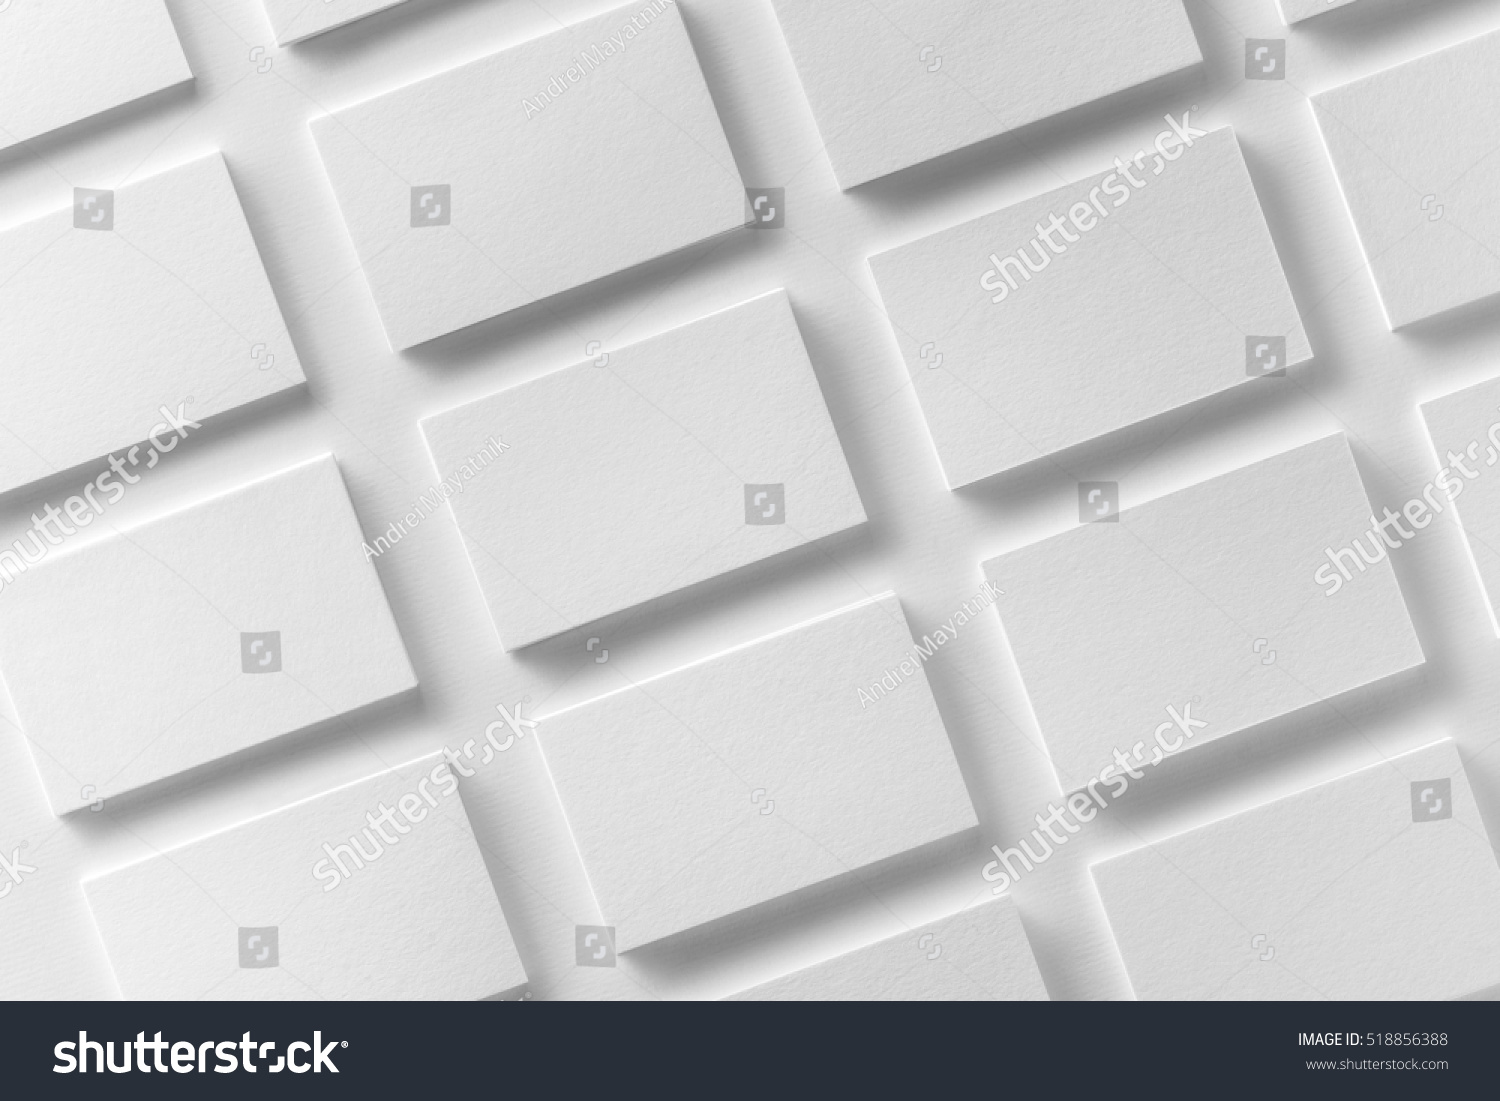 Mockup of horizontal business cards stacks arranged in rows at white textured paper background. #518856388